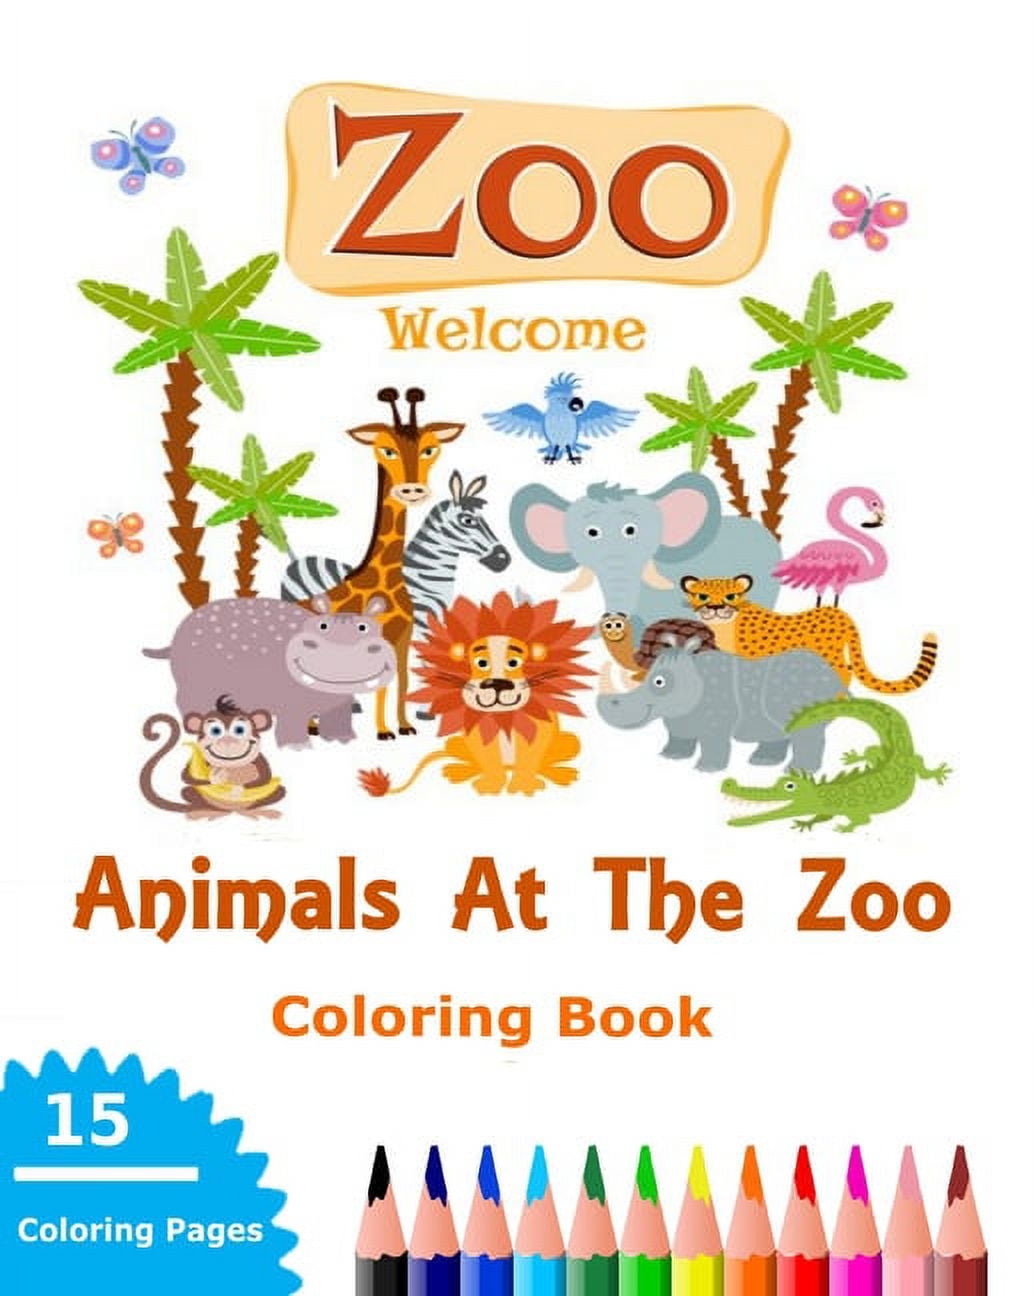 Zoo Bird and Animal - Coloring Book for adults - Bat, Quokka, Badger, Fox,  and more (Paperback)